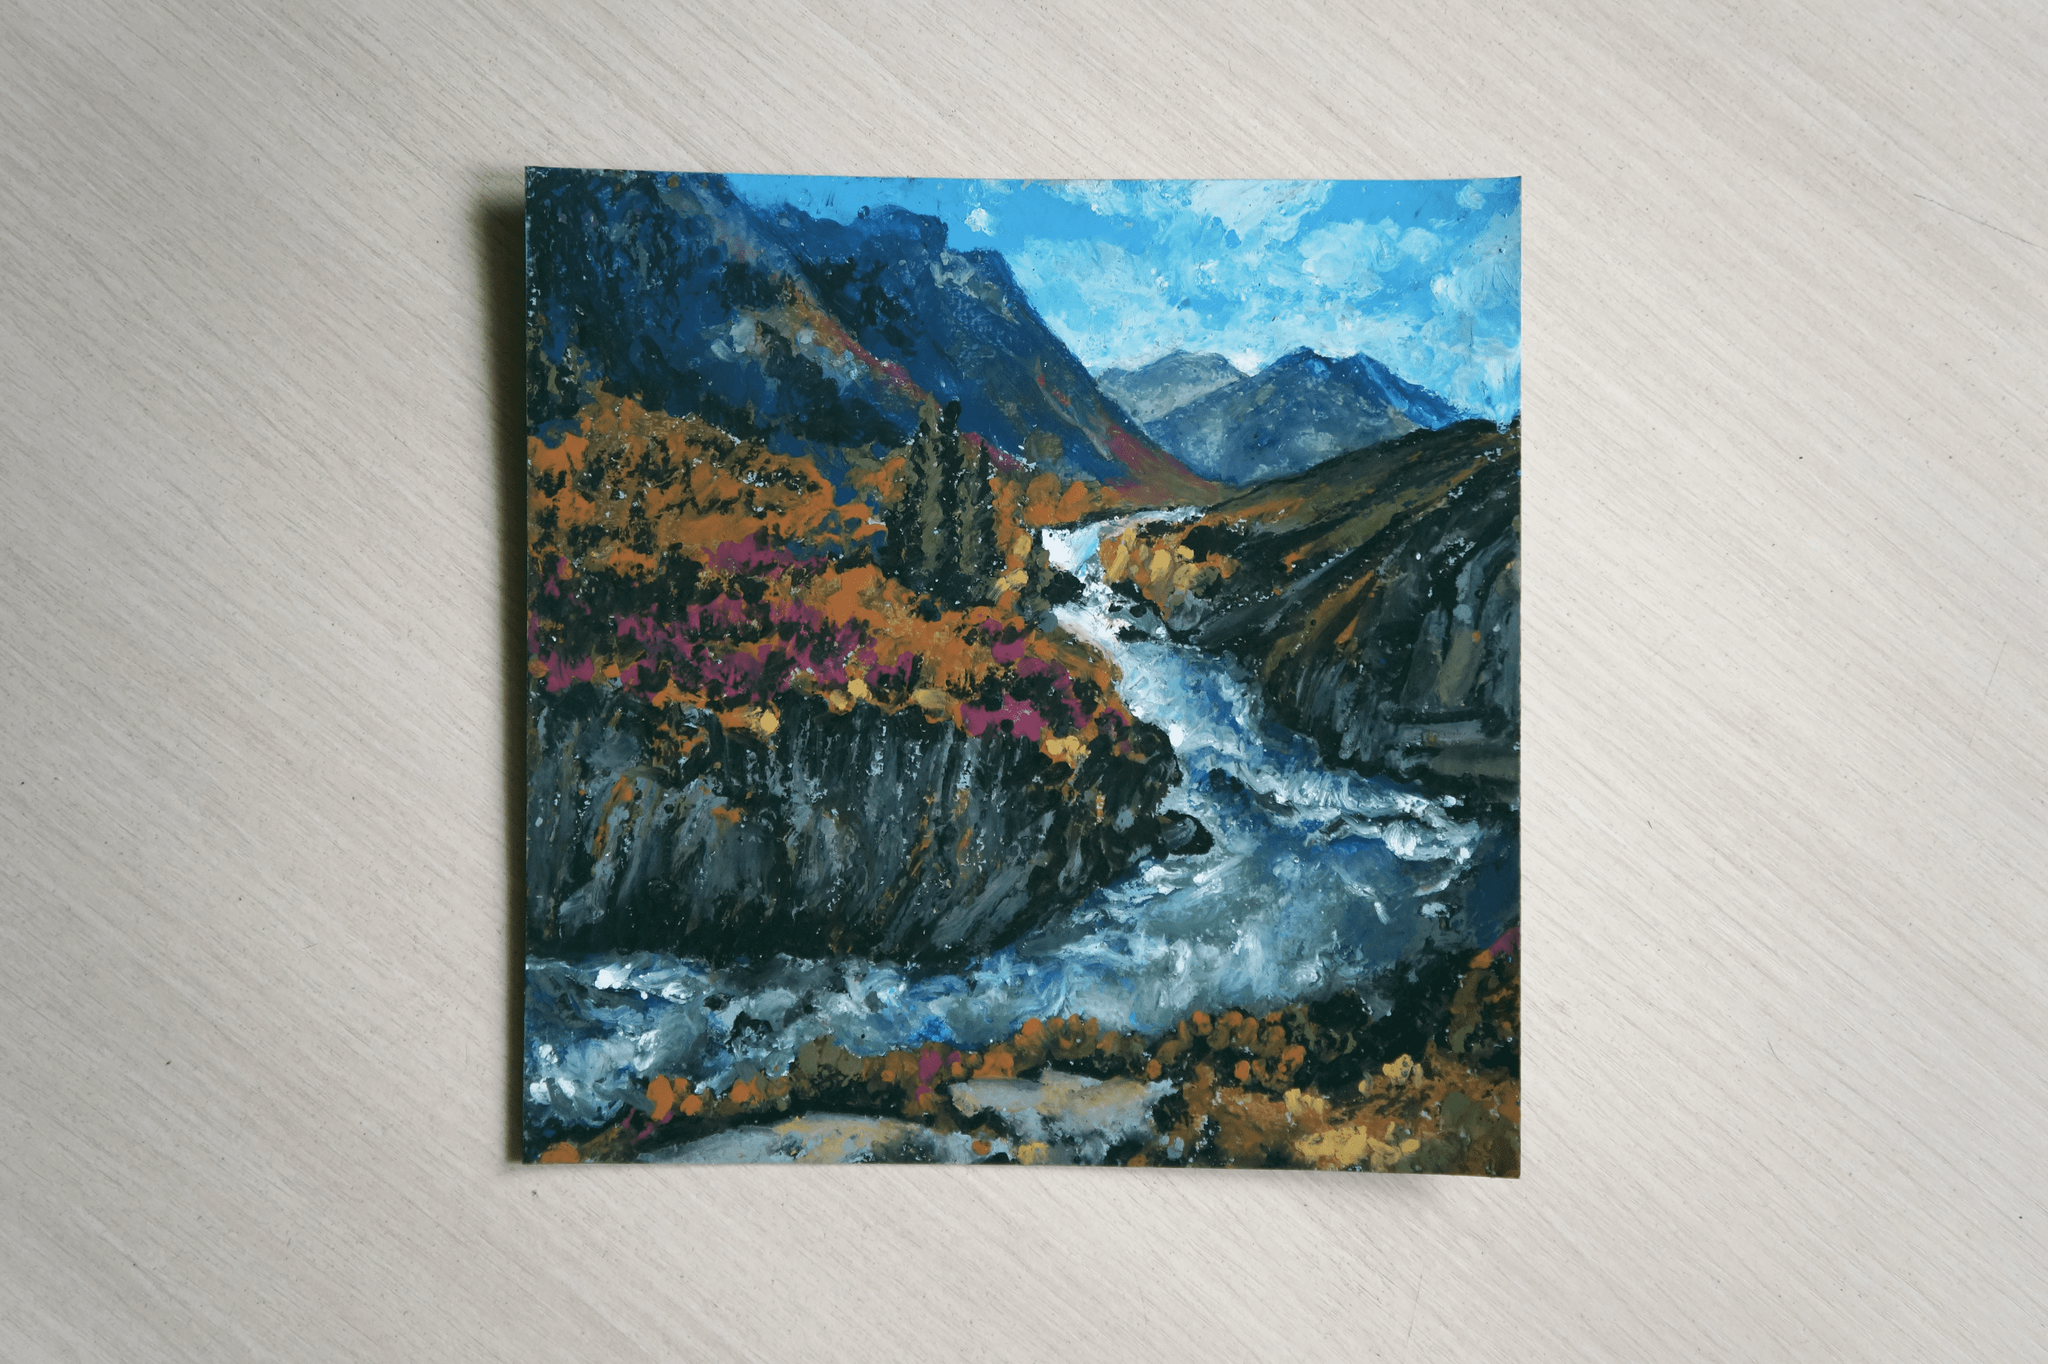 Landscape with oil pastels - My, Creation, Painting, Pastel, Landscape, Painting, Drawing, Impressionism, Painting, Nature, The mountains, Mountain river, Longpost